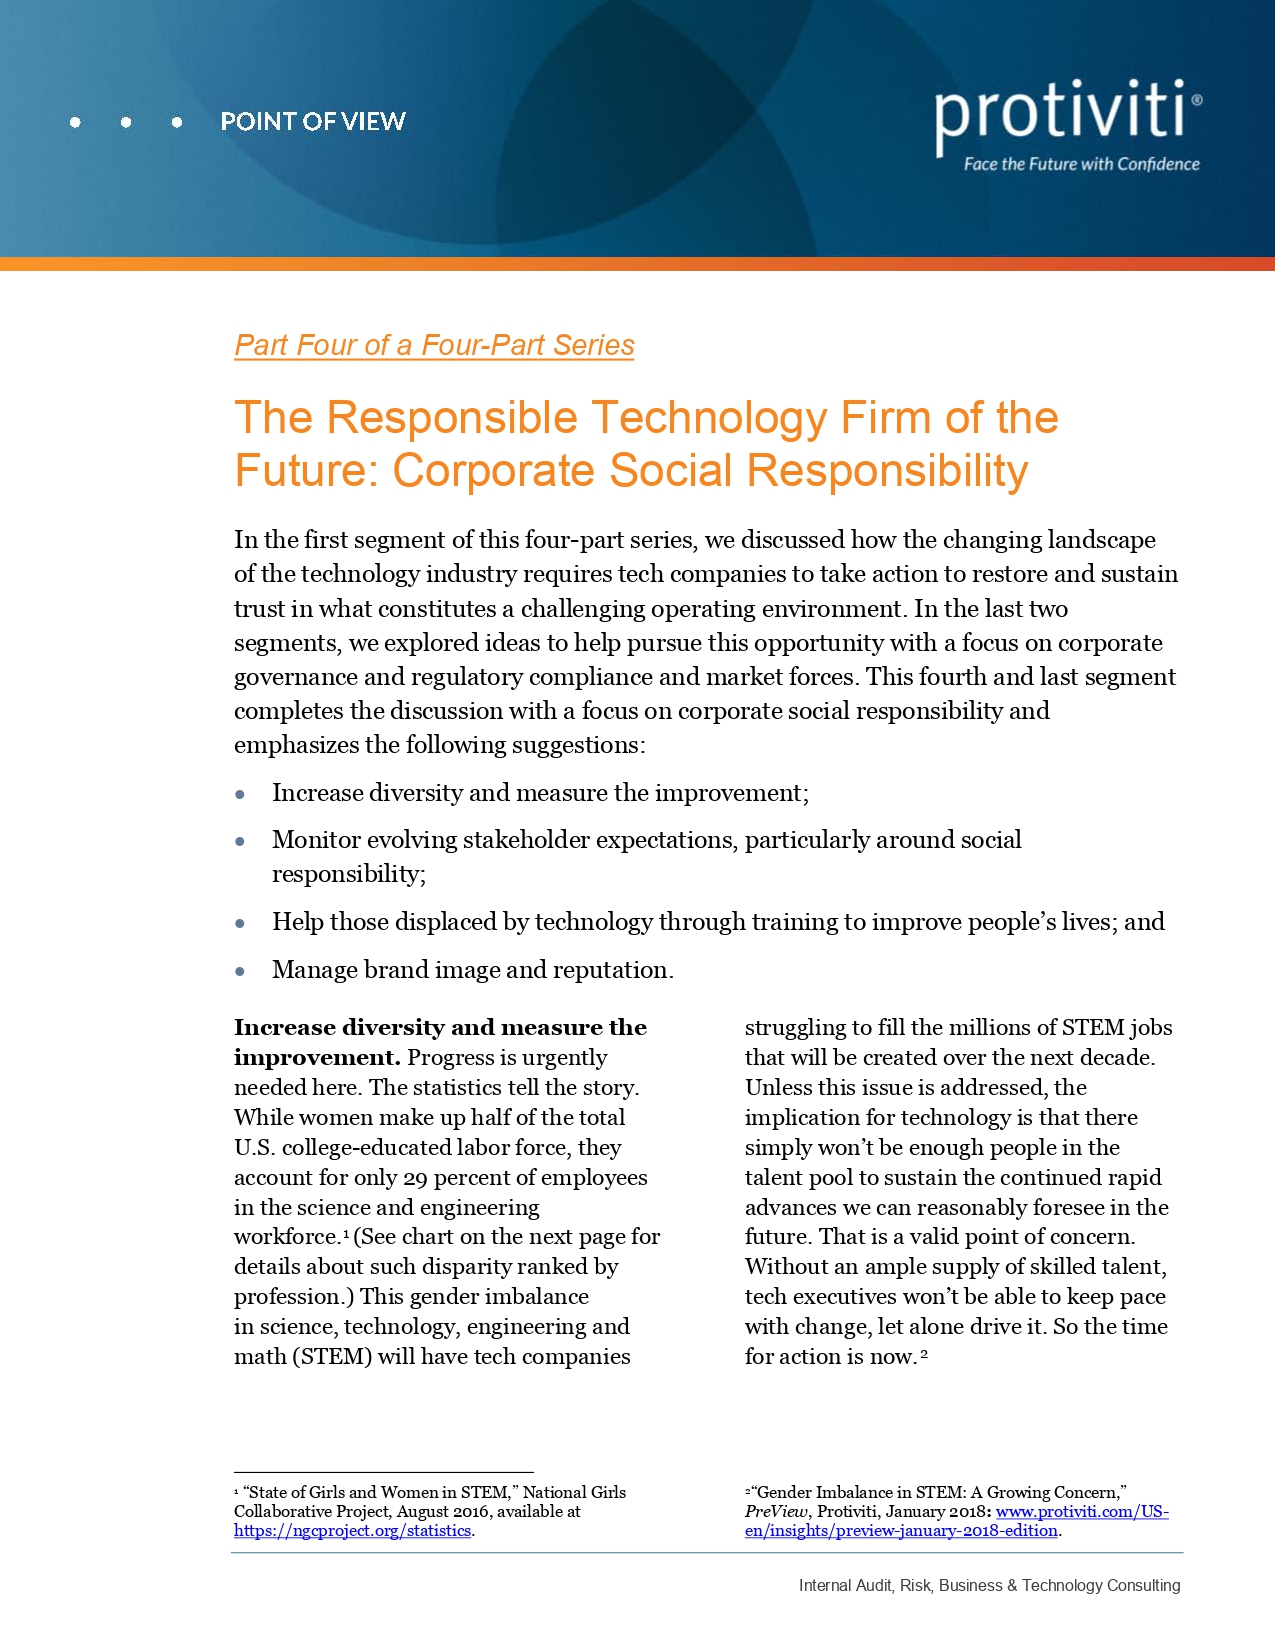 Screenshot of the first page of The Responsible Technology Firm of the Future-Corporate Social Responsibility